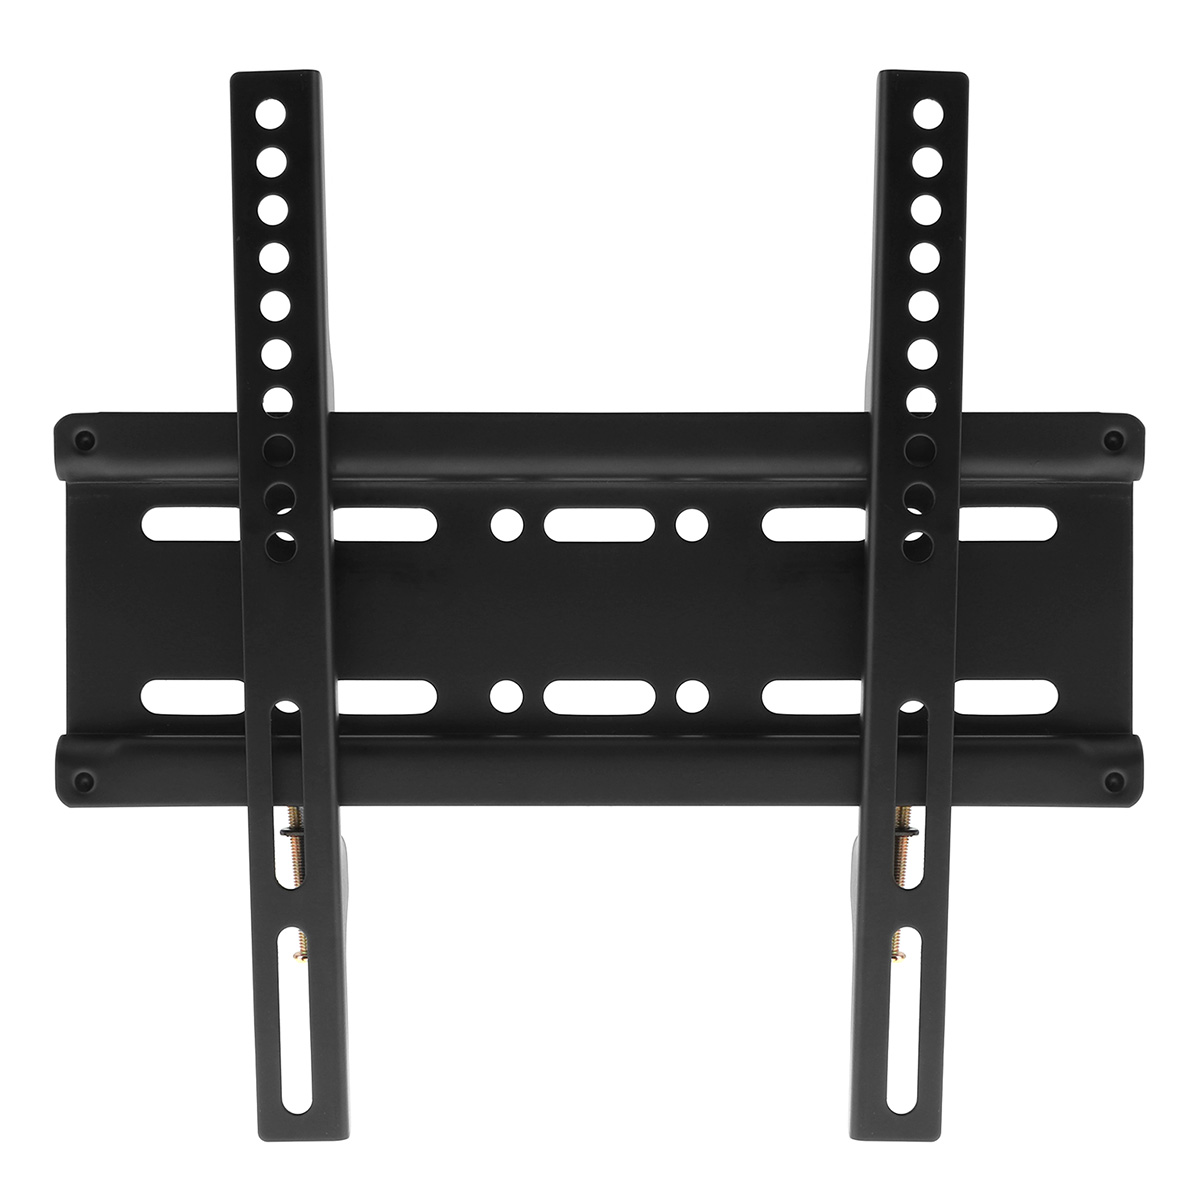 Universal Thin 25KG TV Wall Mount Bracket PC Monitor TV Holder TV Frame TV Wall Holder 12-37 Inch LCD LED Monitor Stand